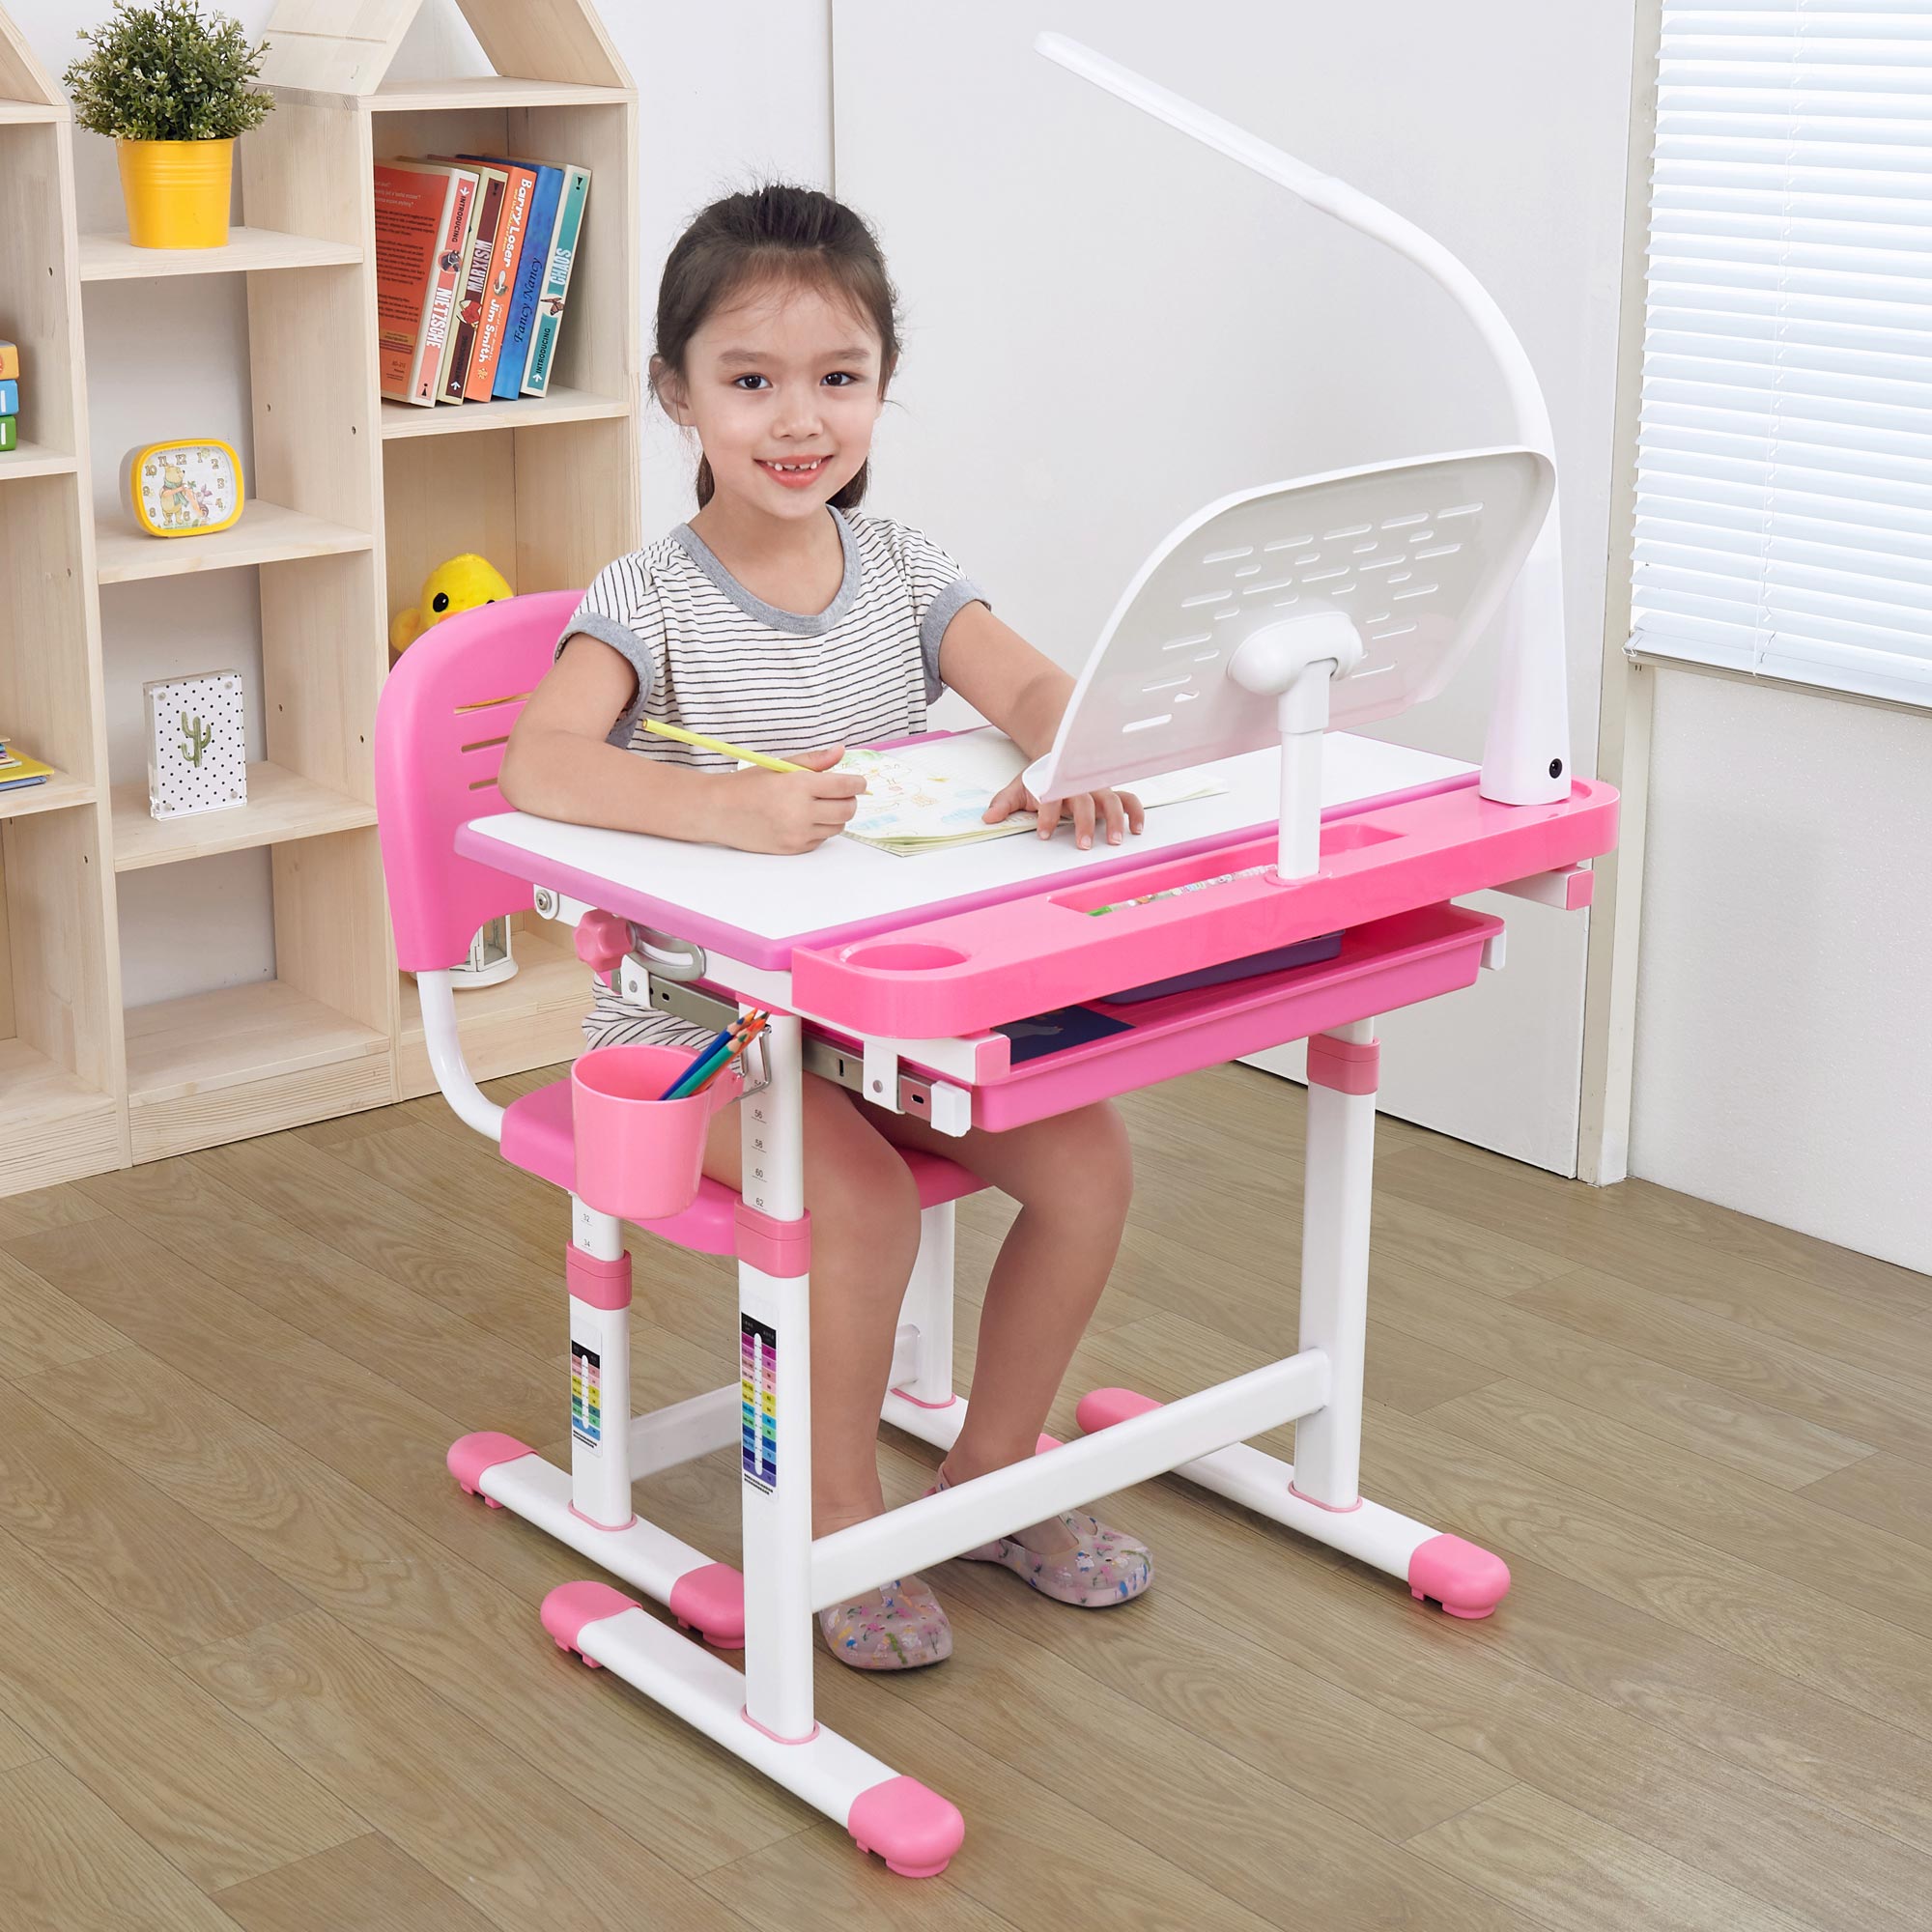 Study Chair For Kids : Kids Study Table and Chair Set,Ergonomically